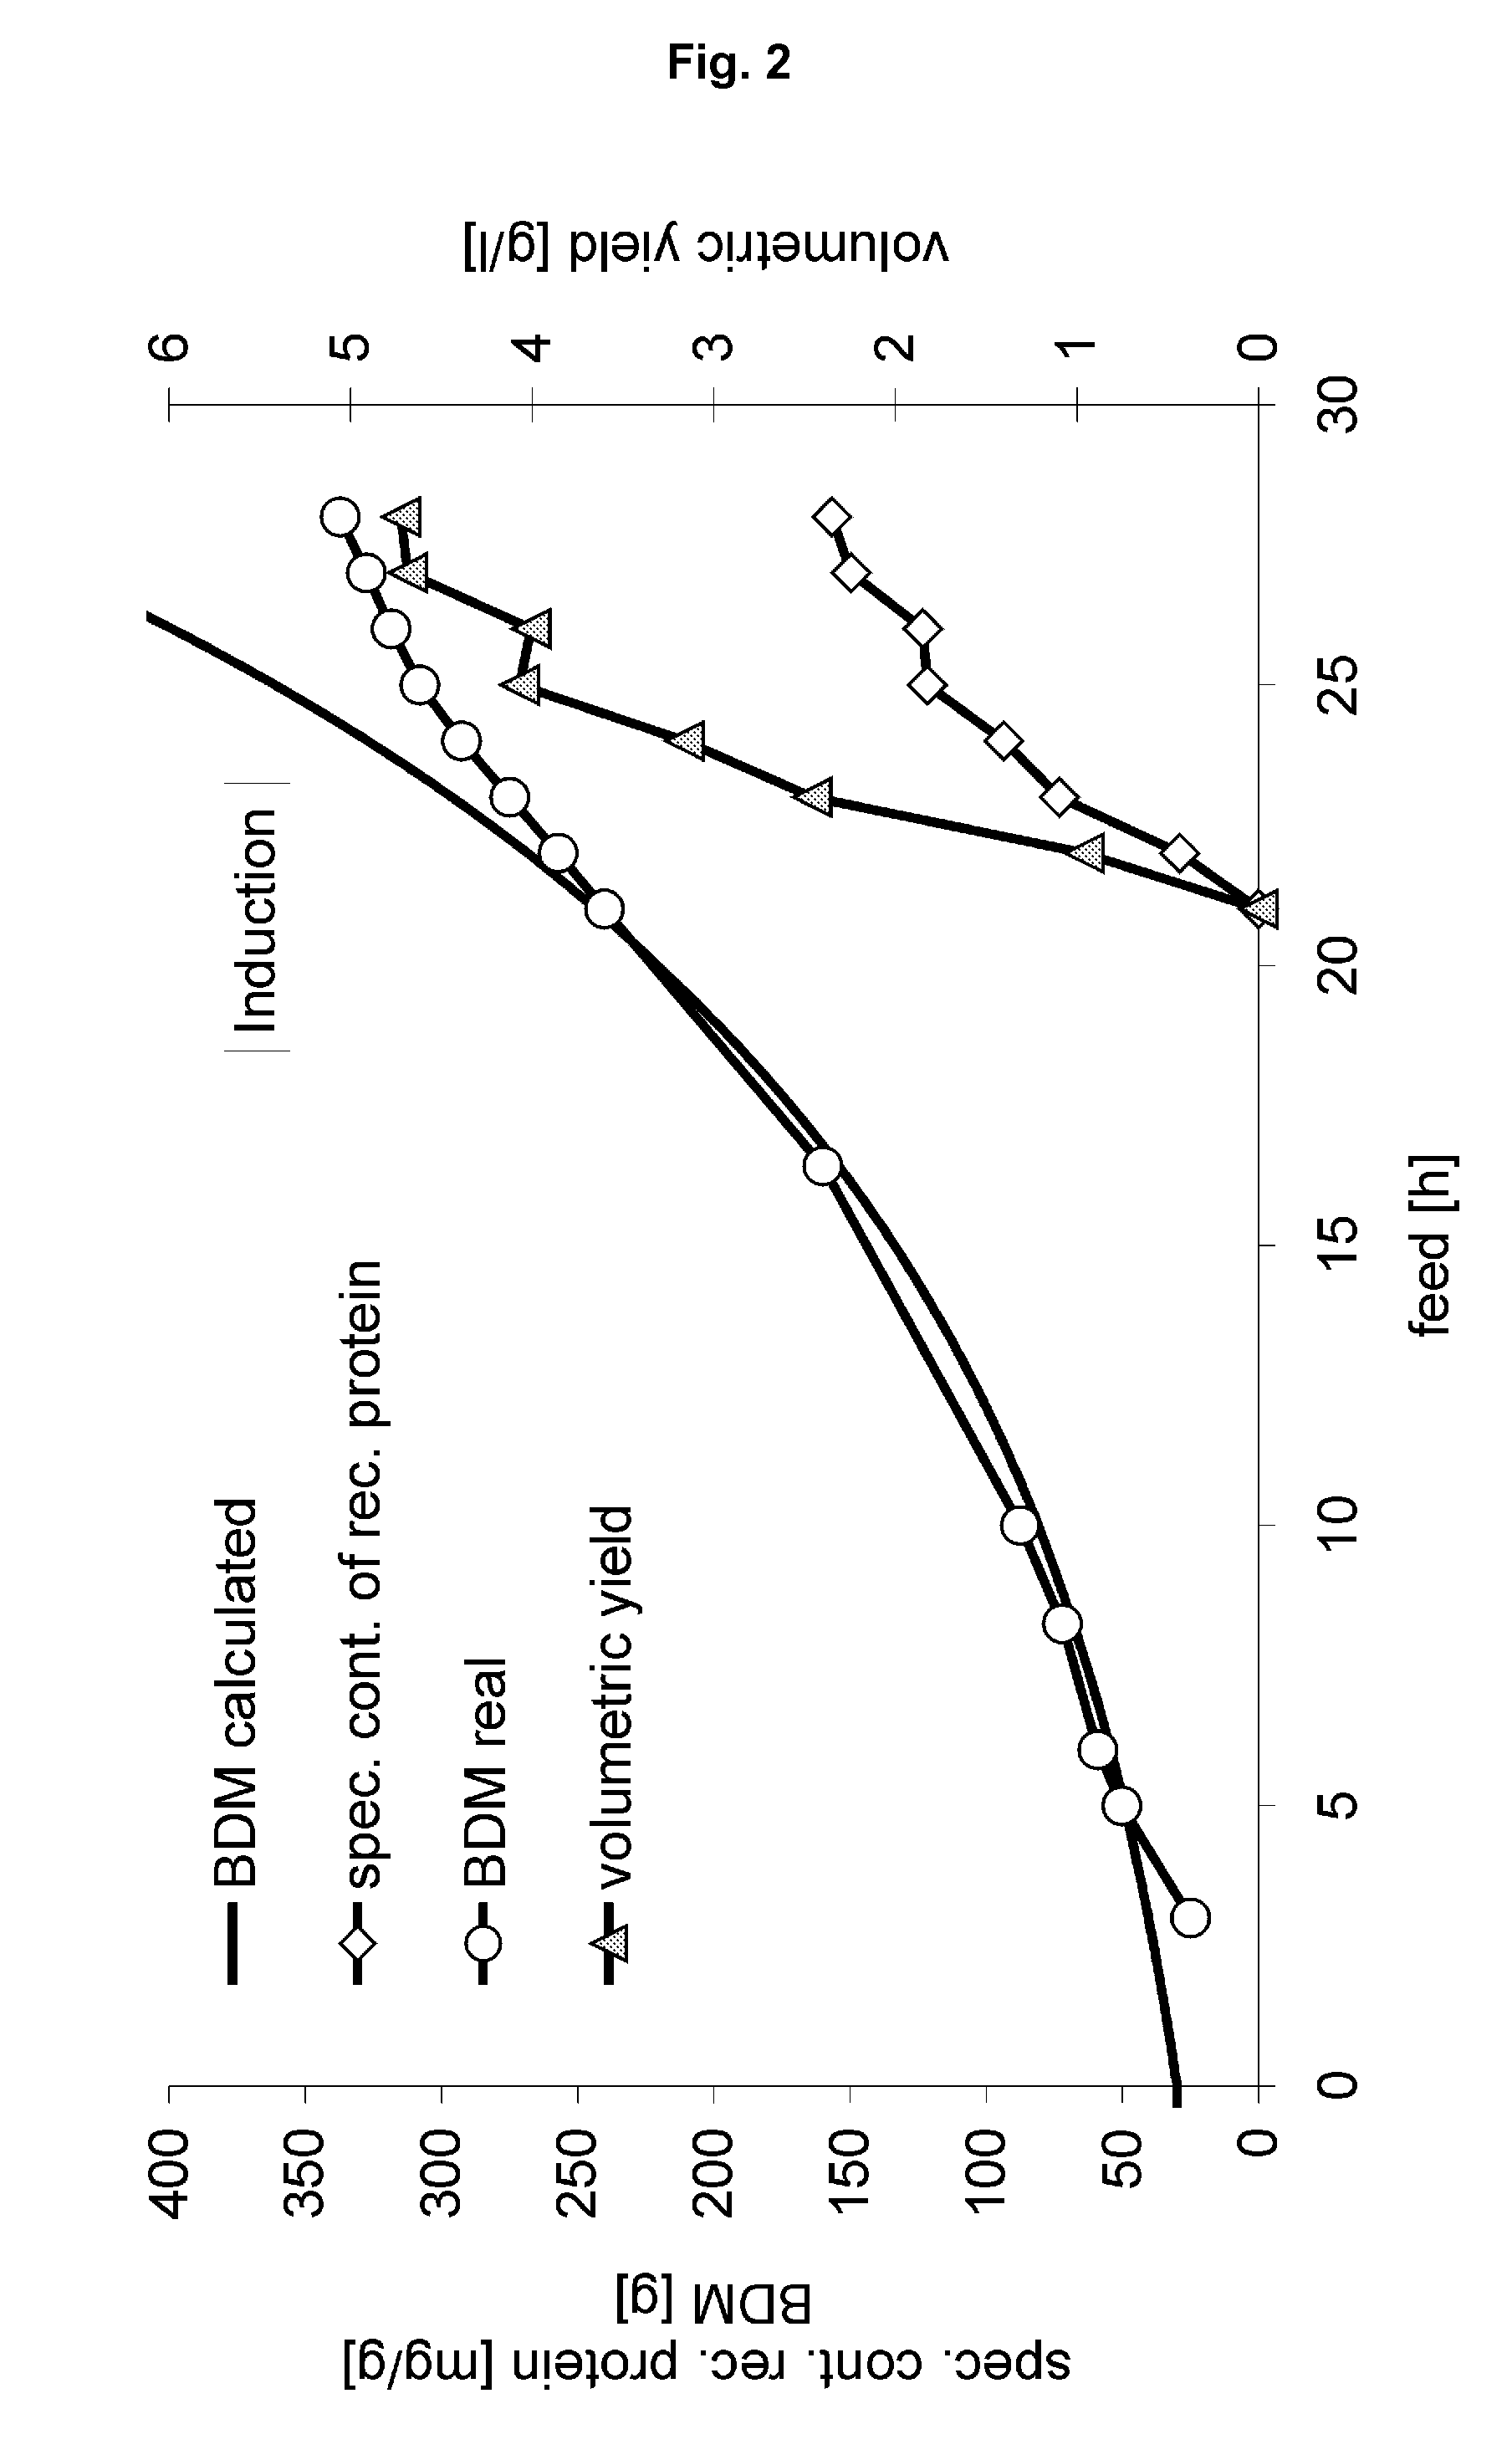 Method for producing a recombinant protein on a manufacturing scale